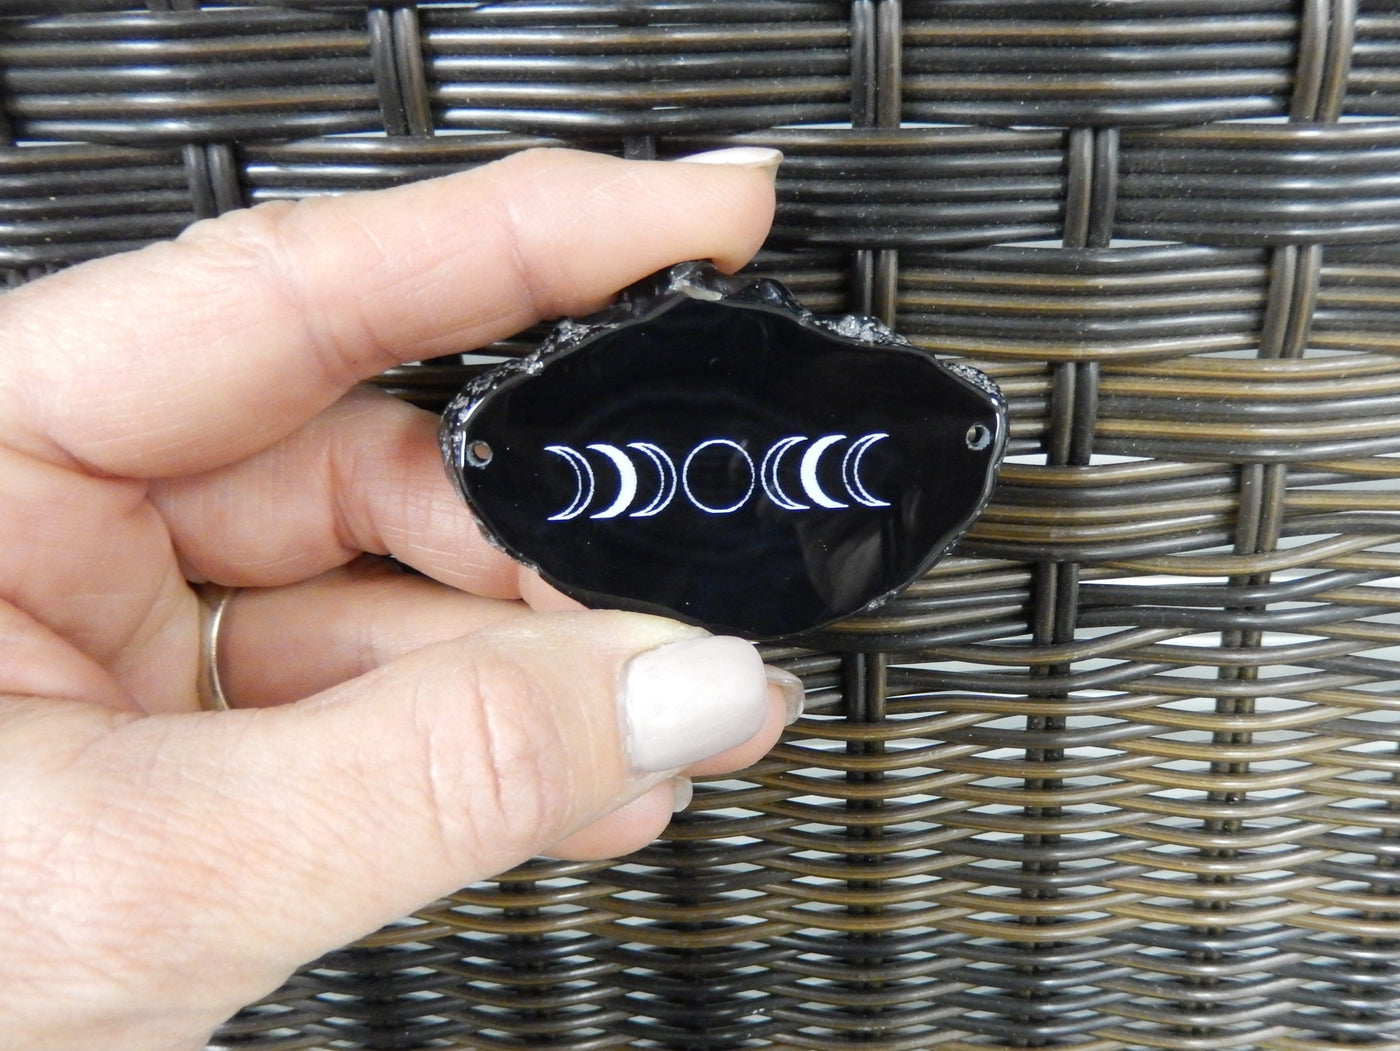 Picture of black double drilled agate slice, displayed in hand for hand reference.